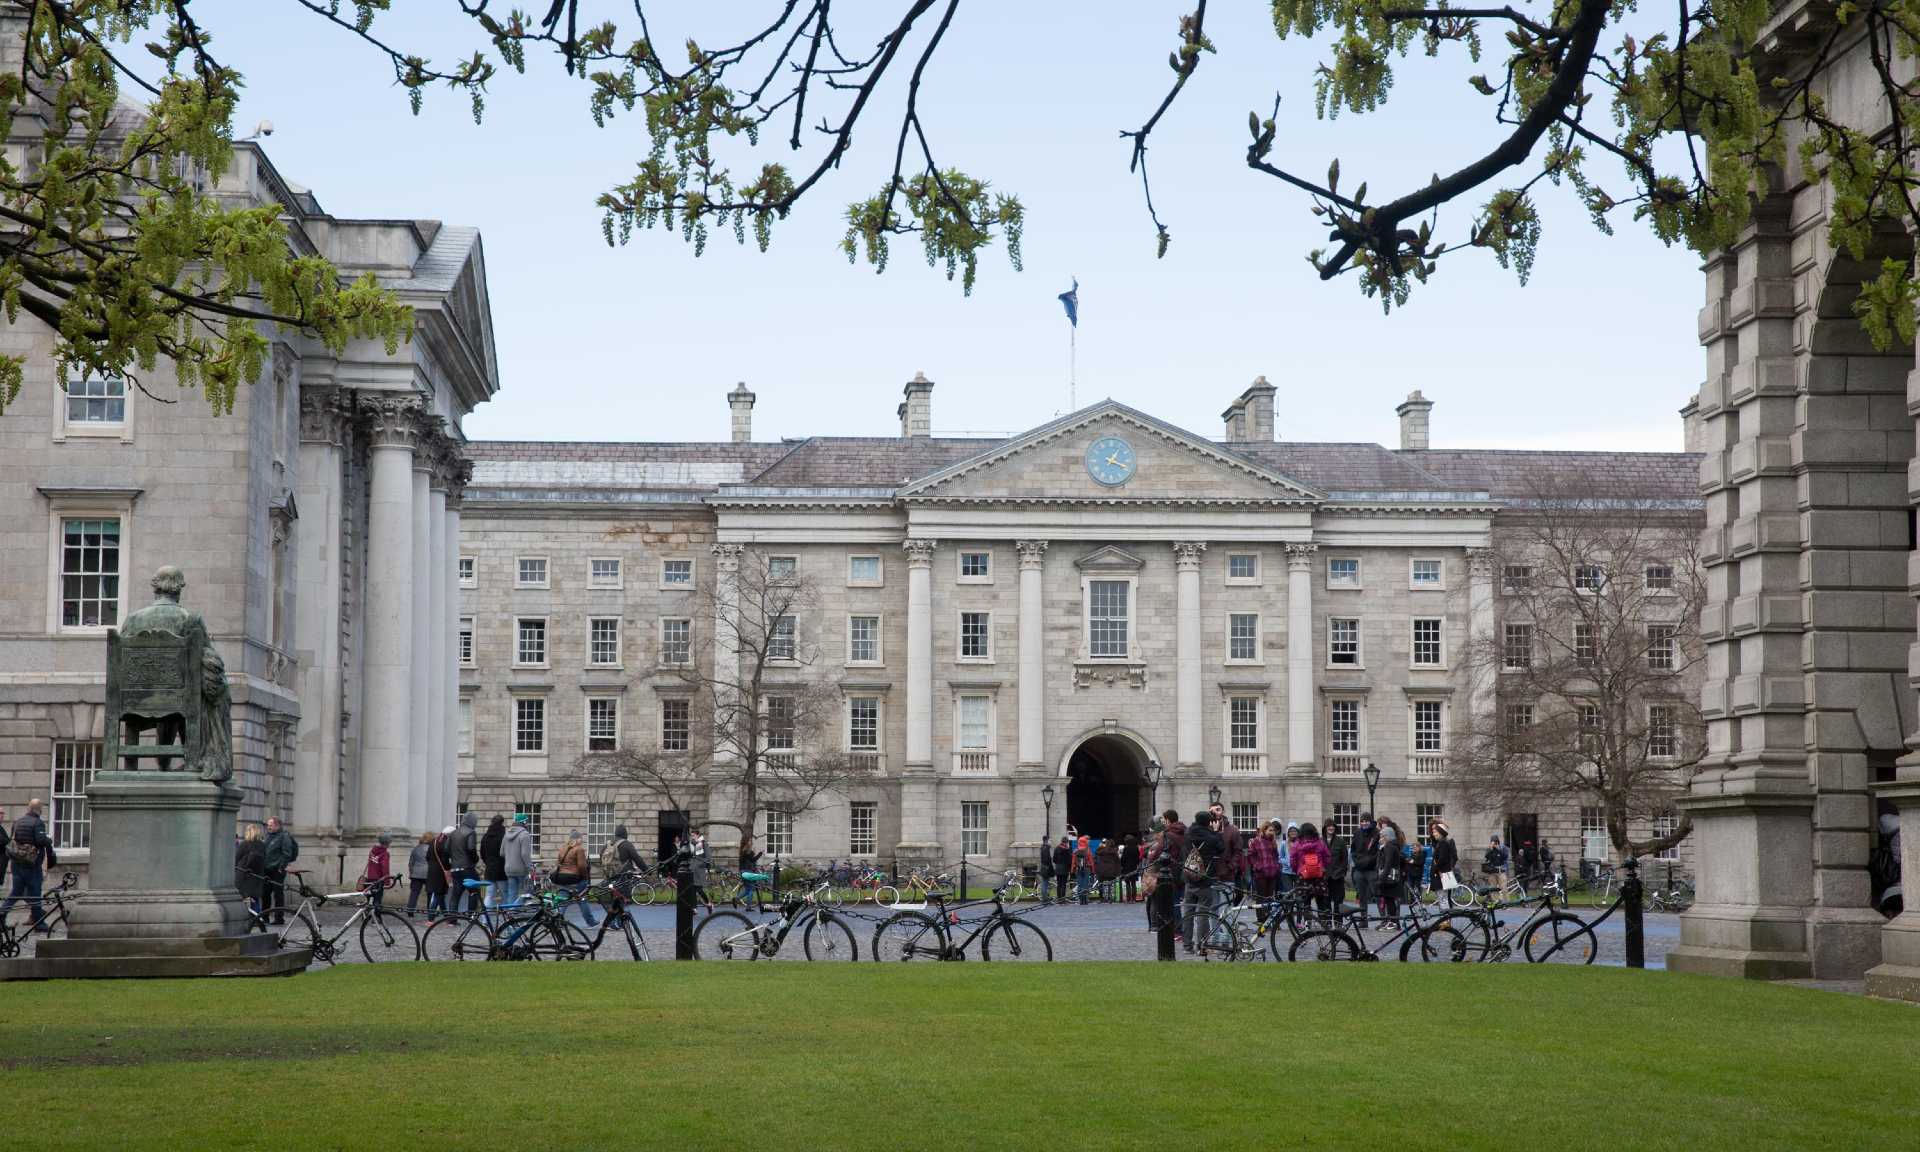 Trinity College Dublin enhances student and staff safety and support with SafeZone from CriticalArc